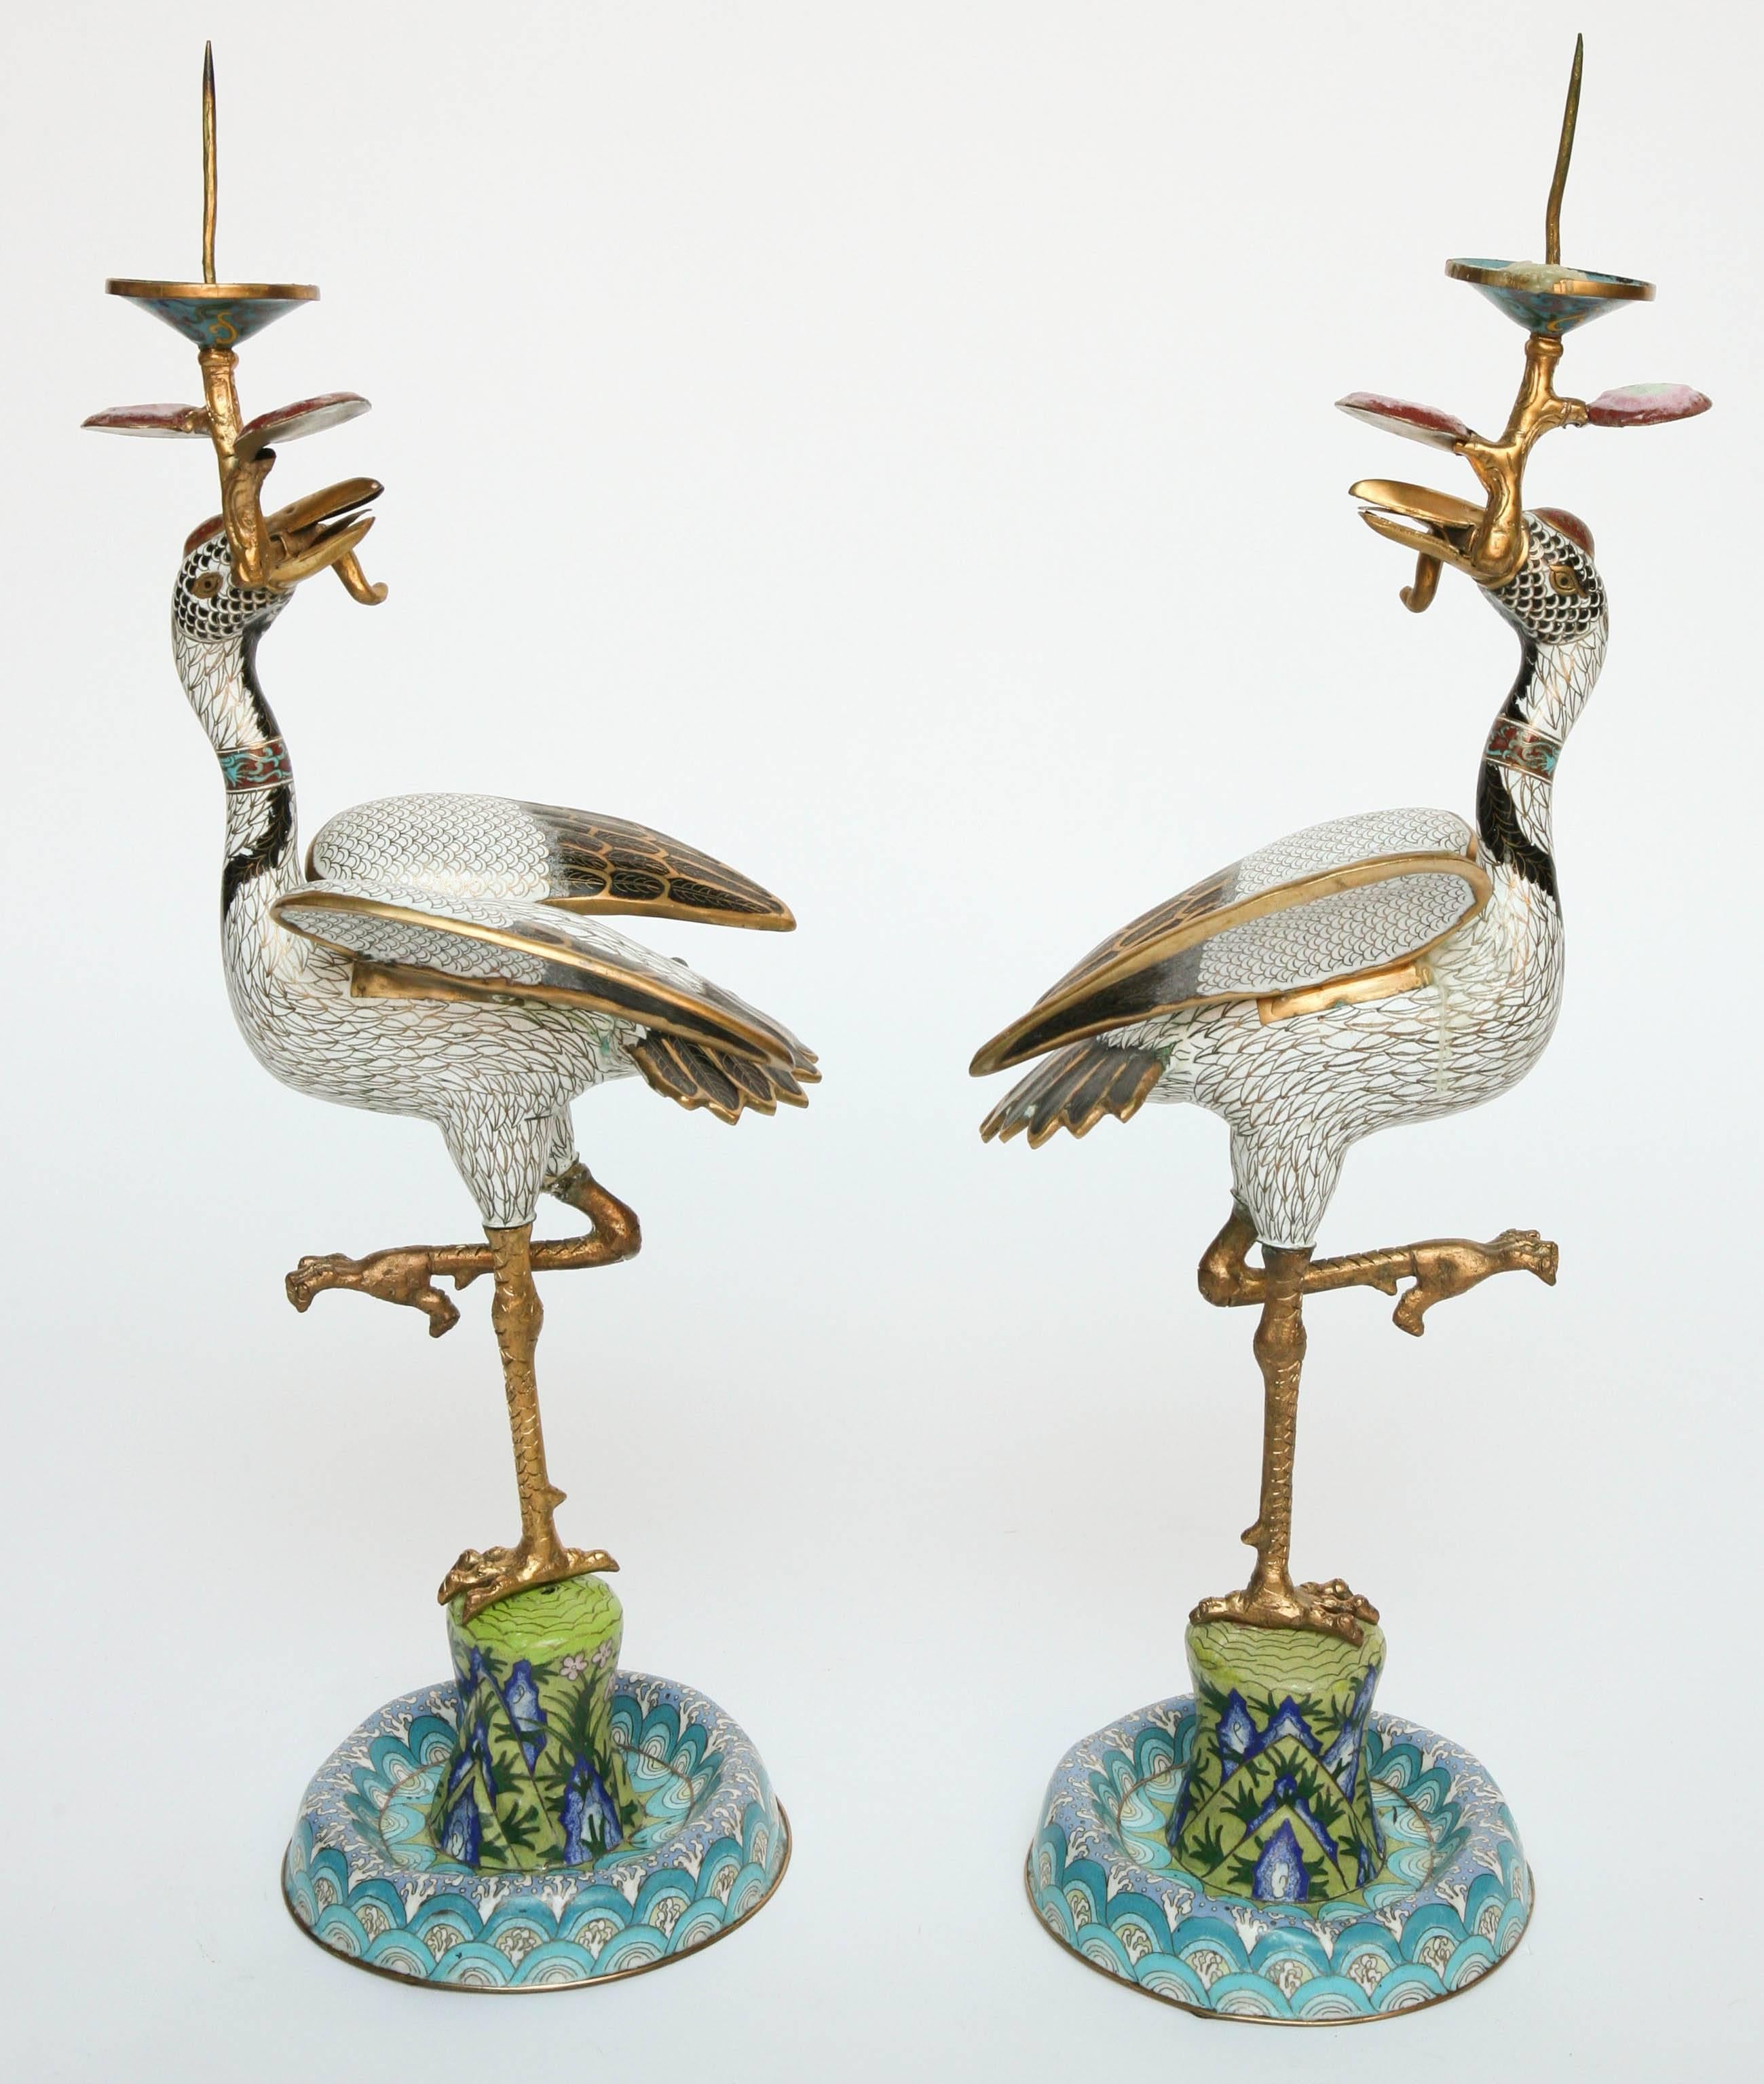 Classic and elegant form, generous in scale and elaborate cloisonné detail.
 